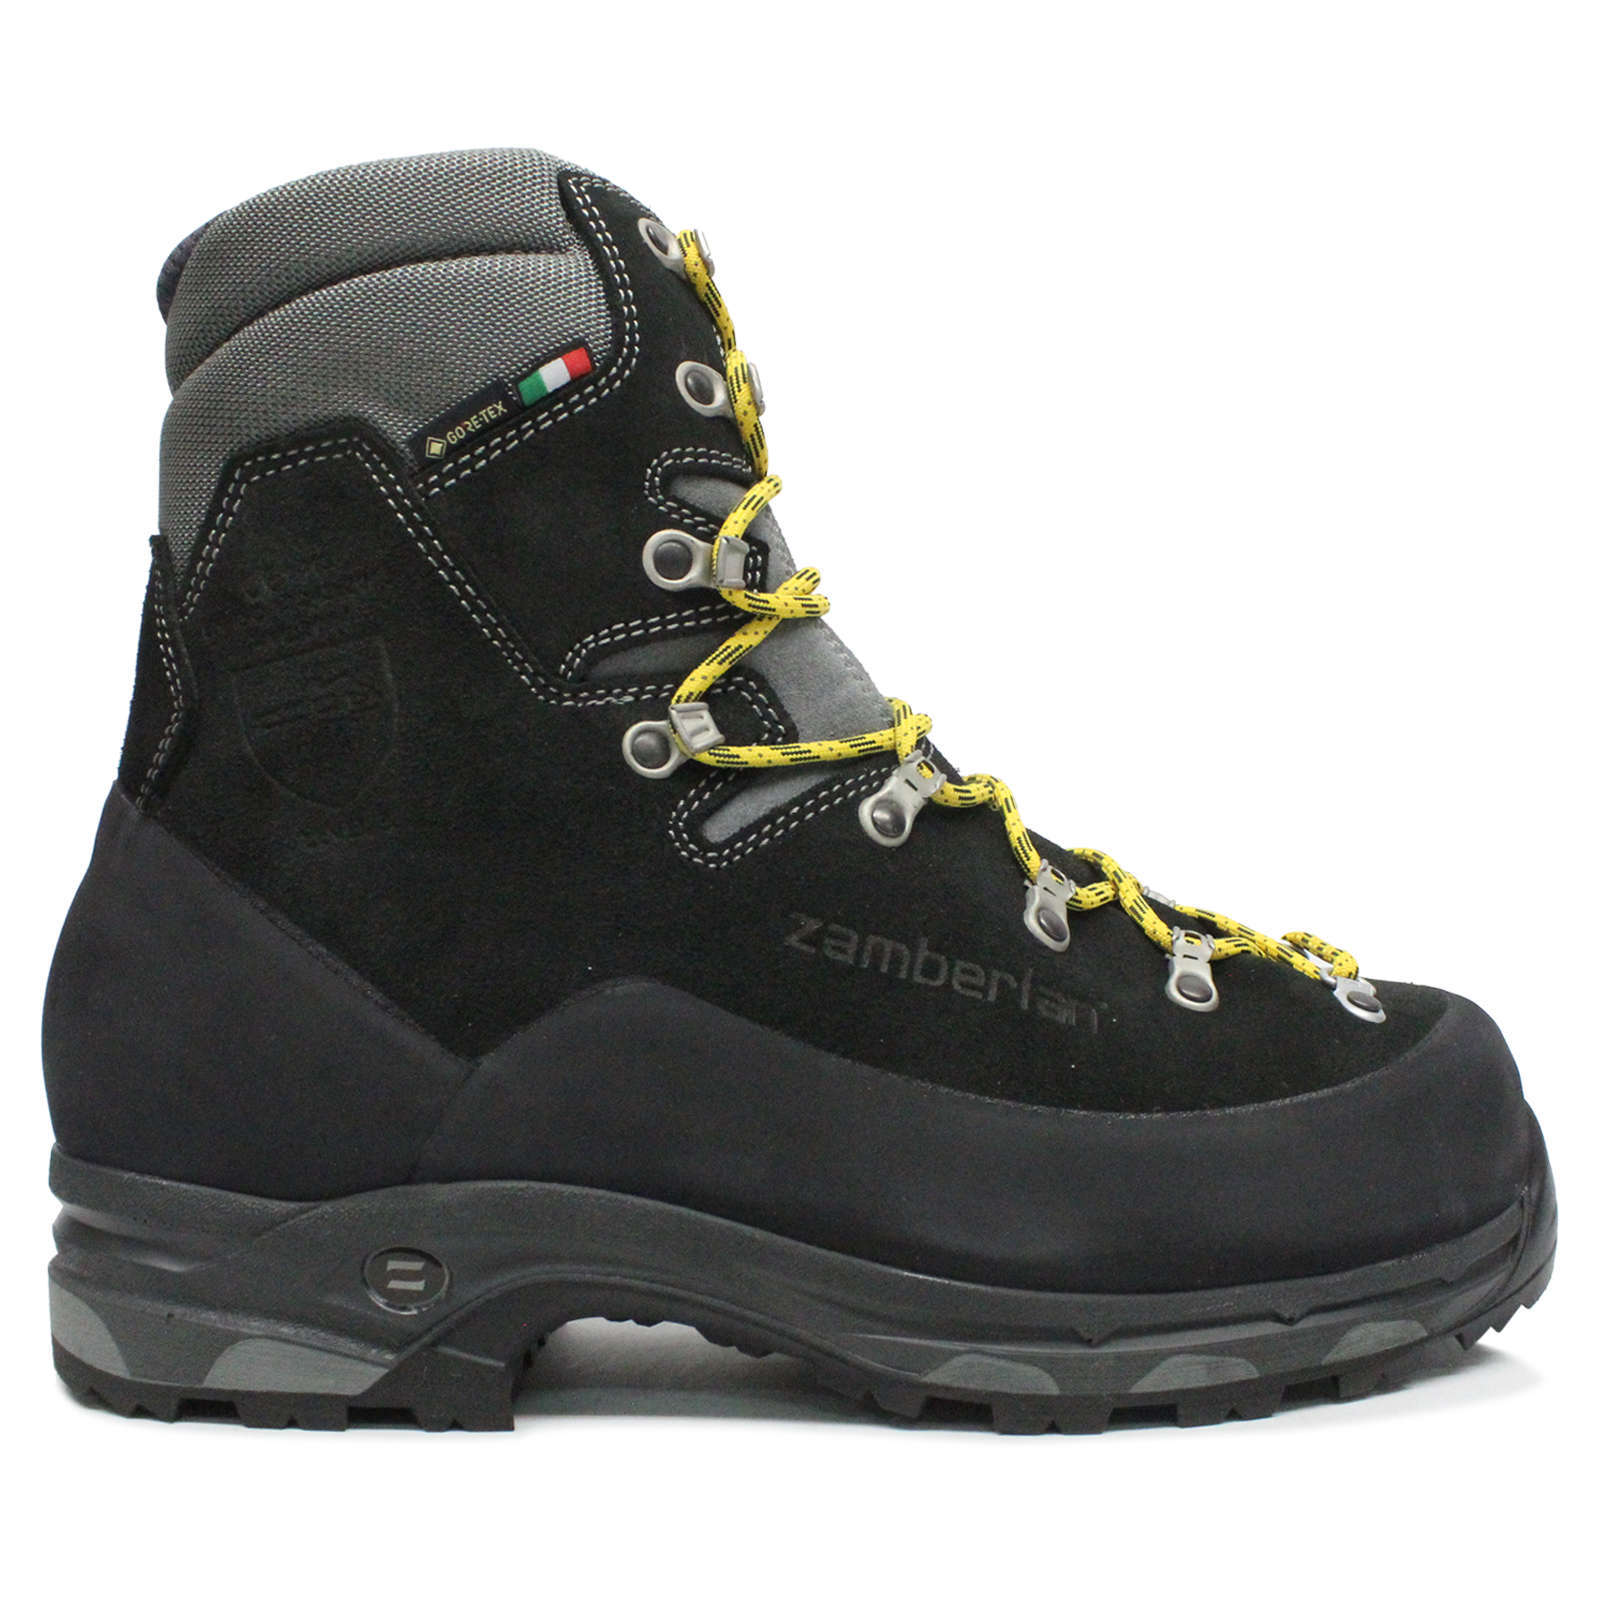 5010 Logger GTX RR Suede Leather Waterproof Men's Mountaineering Boots